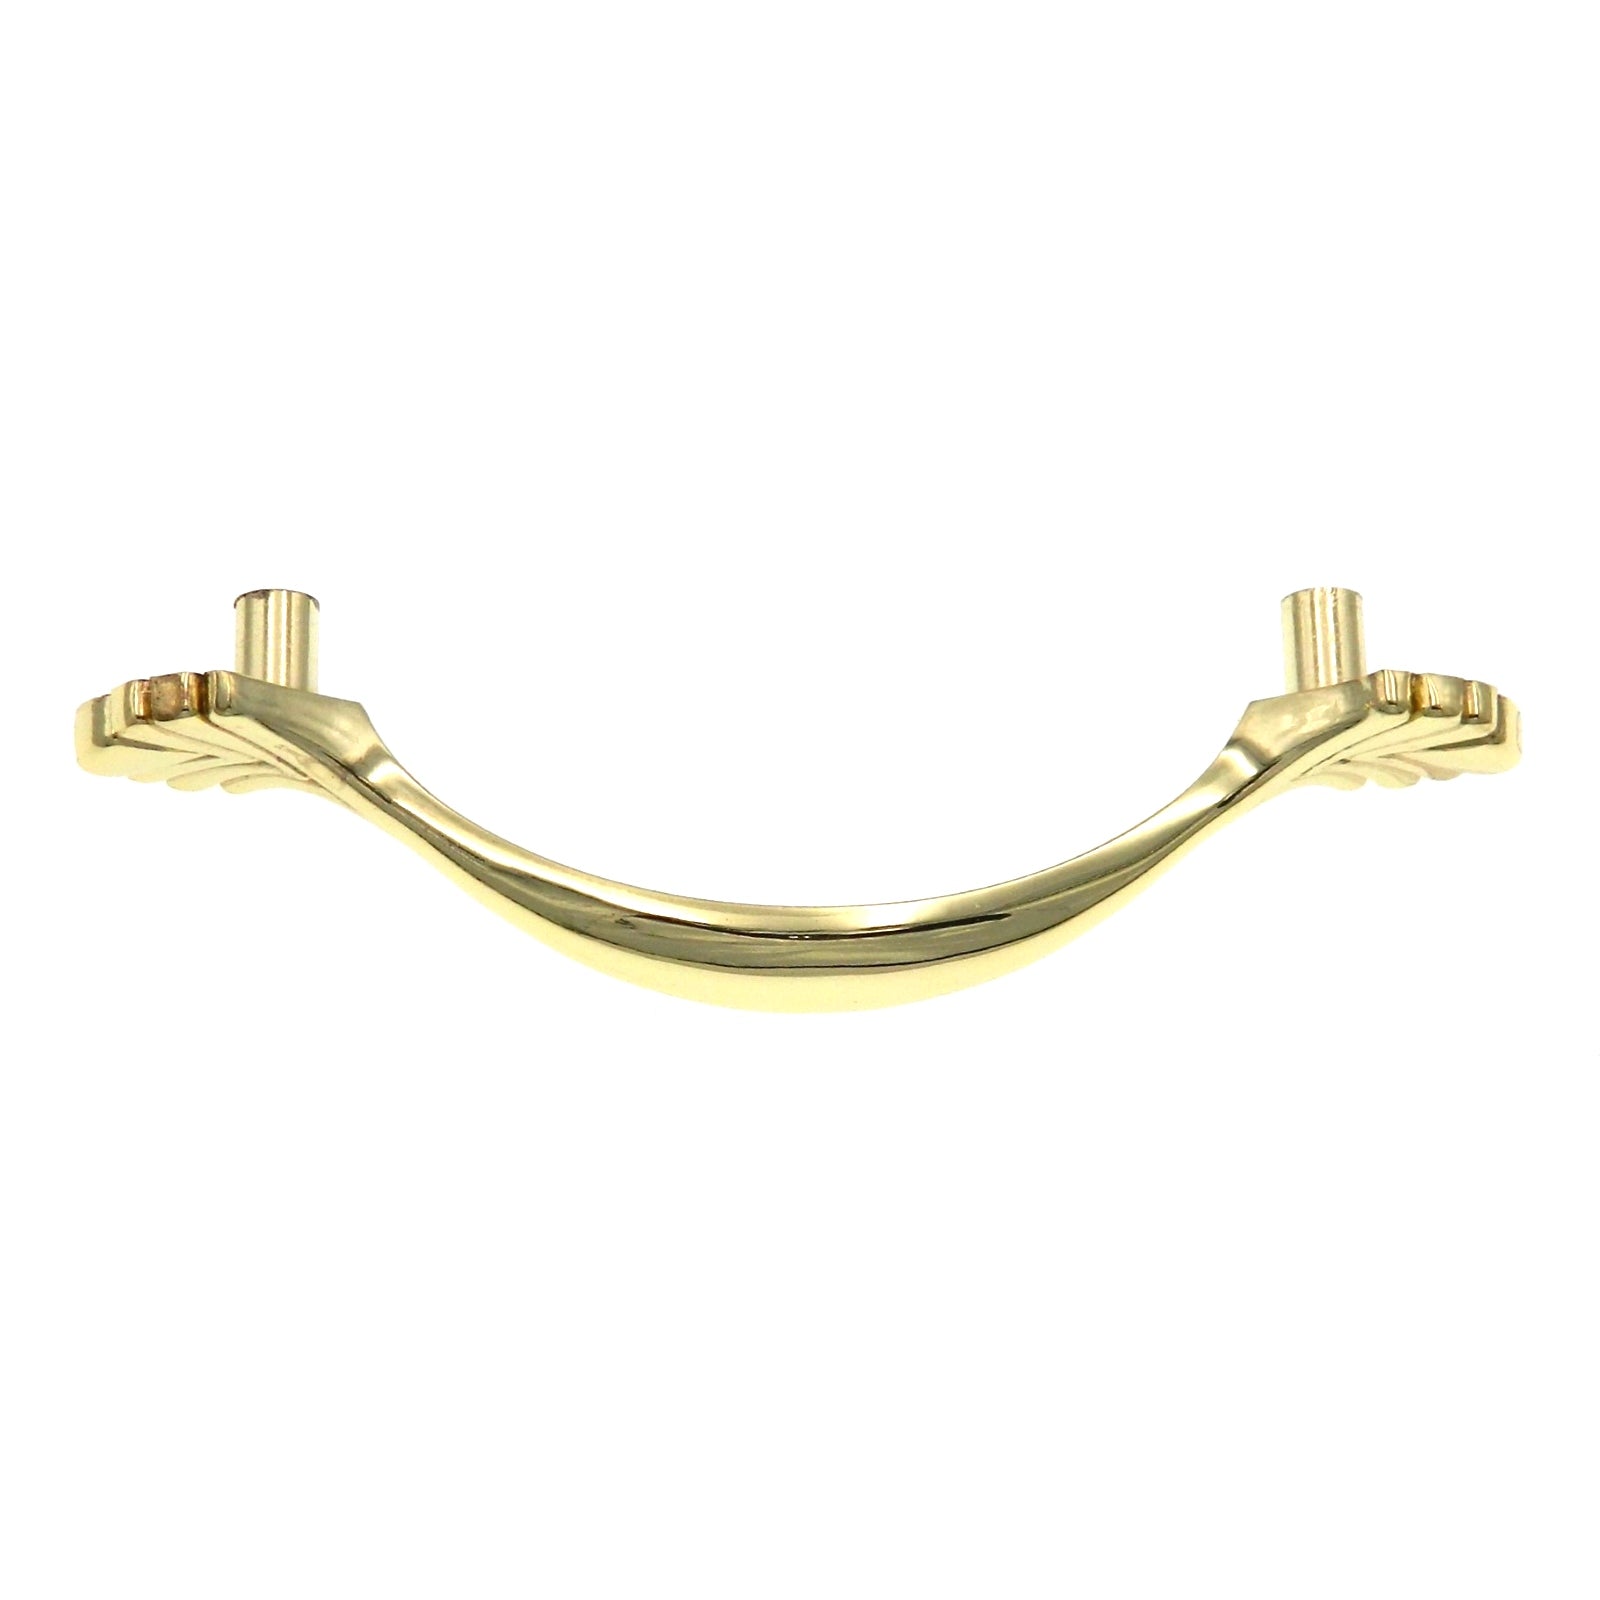 Warwick Traditional Polished Brass 3"cc Solid Arch Cabinet Handle Pull DH1023PB